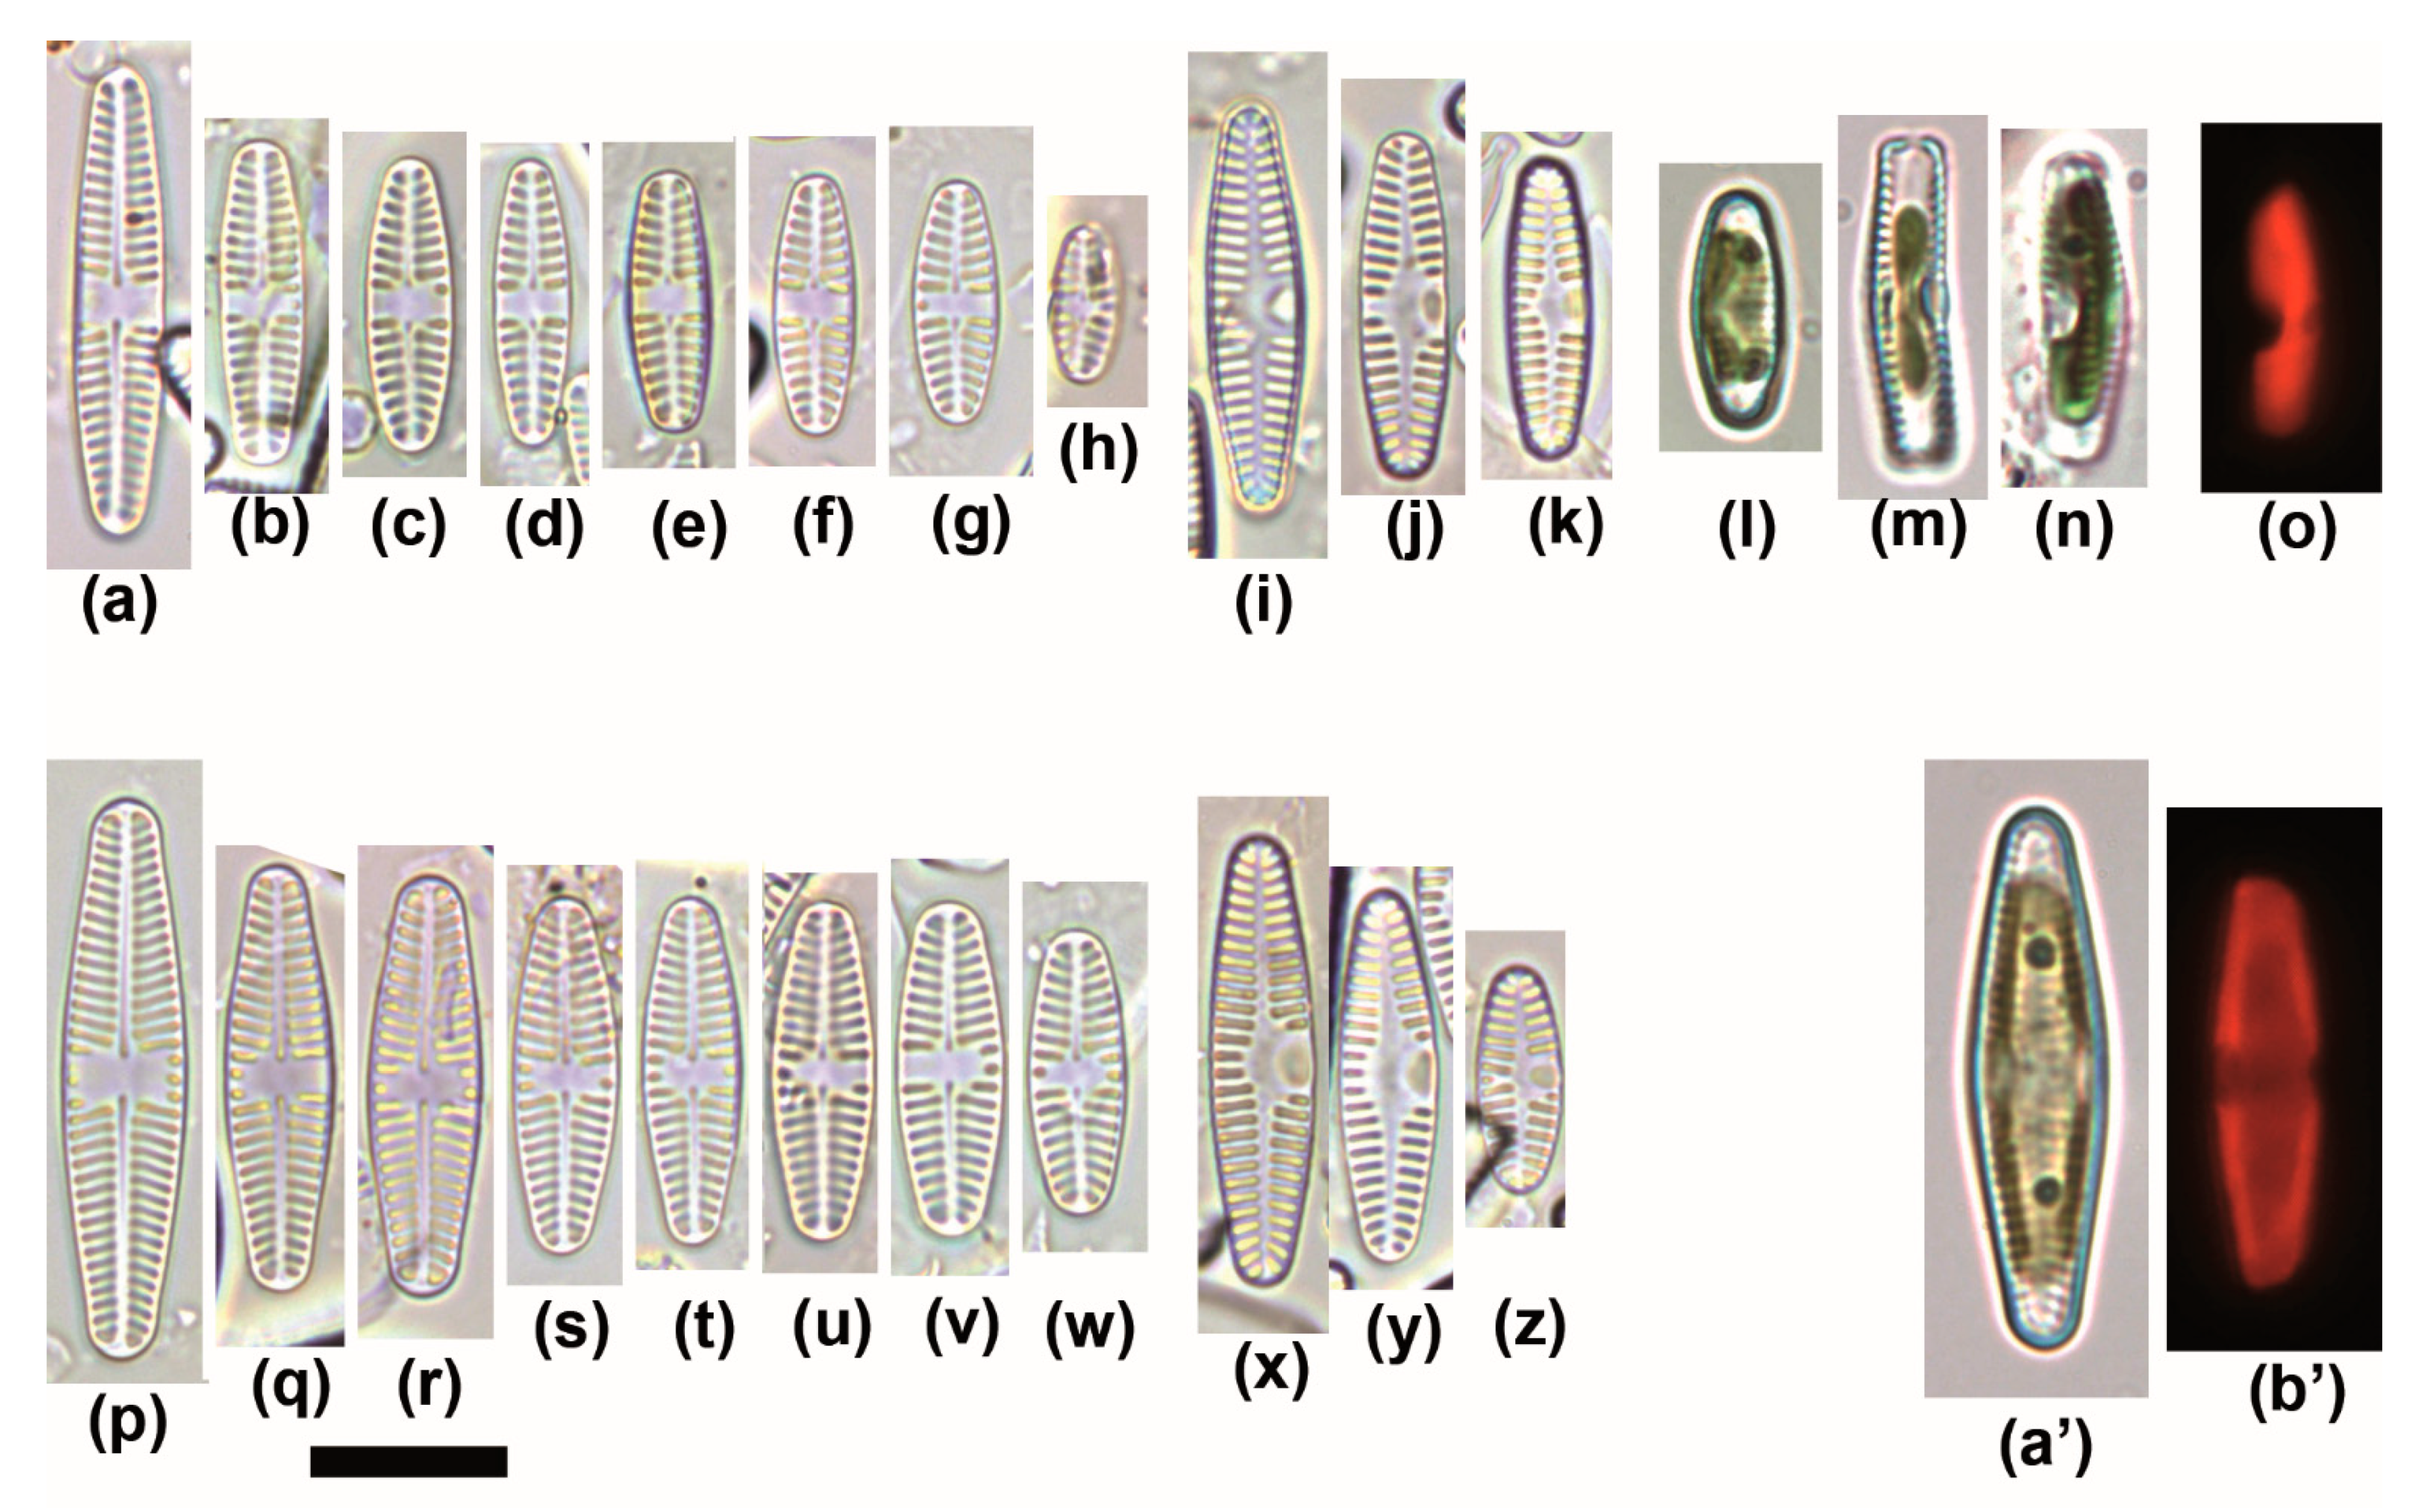 How to identify diatoms from their girdle views